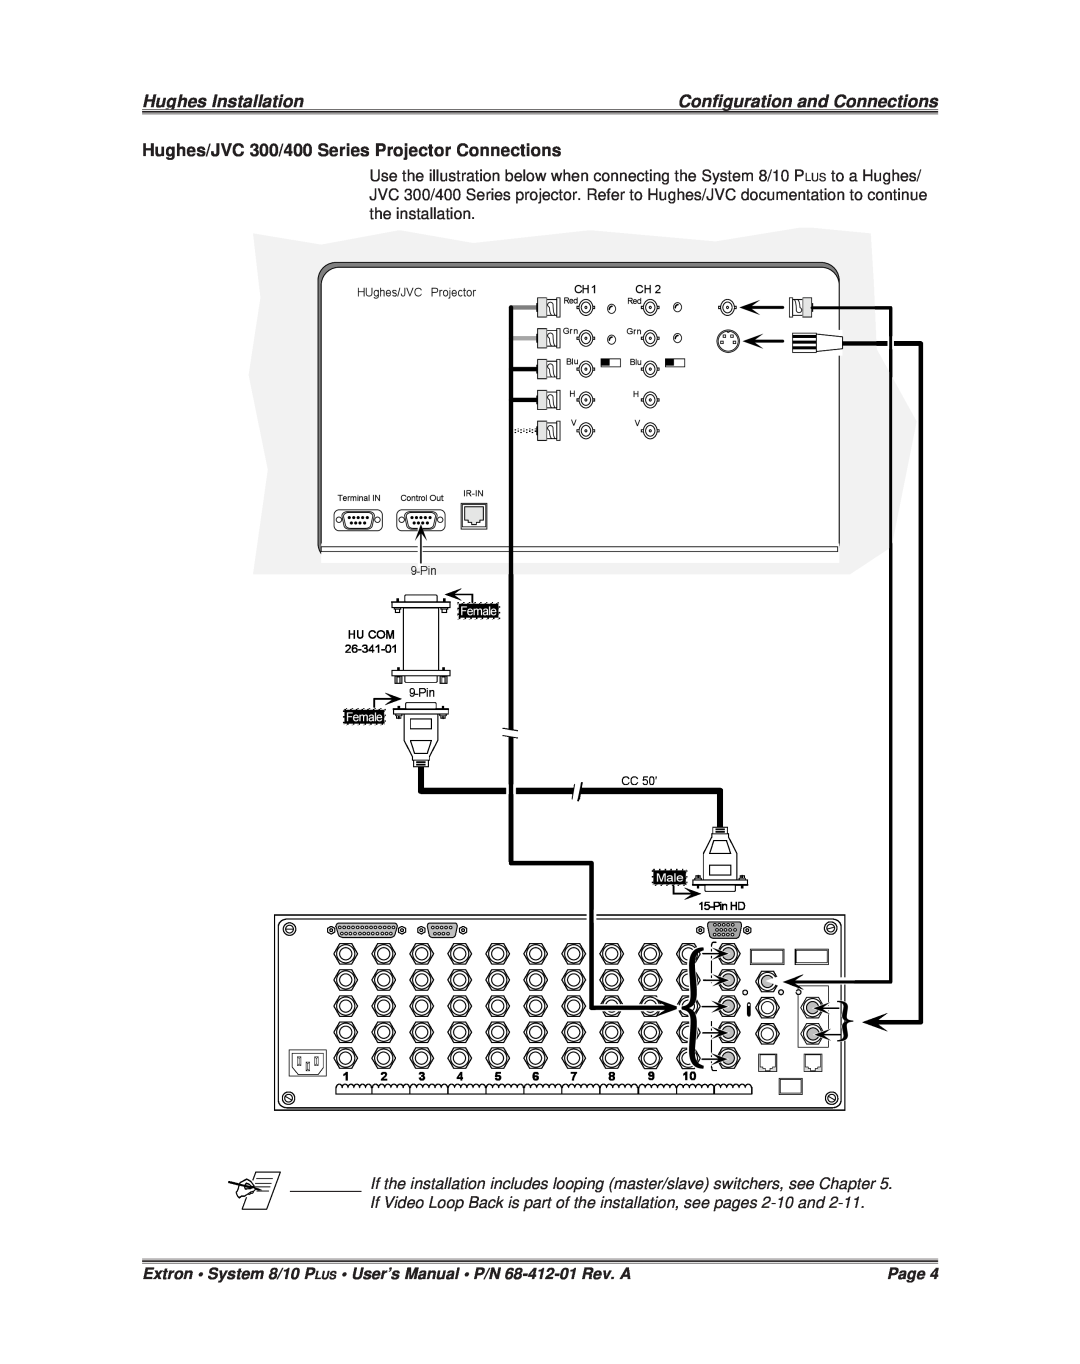 Extron electronic SYSTEM 8/10 PLUS installation instructions Hughes Installation, Configuration and Connections, Page 